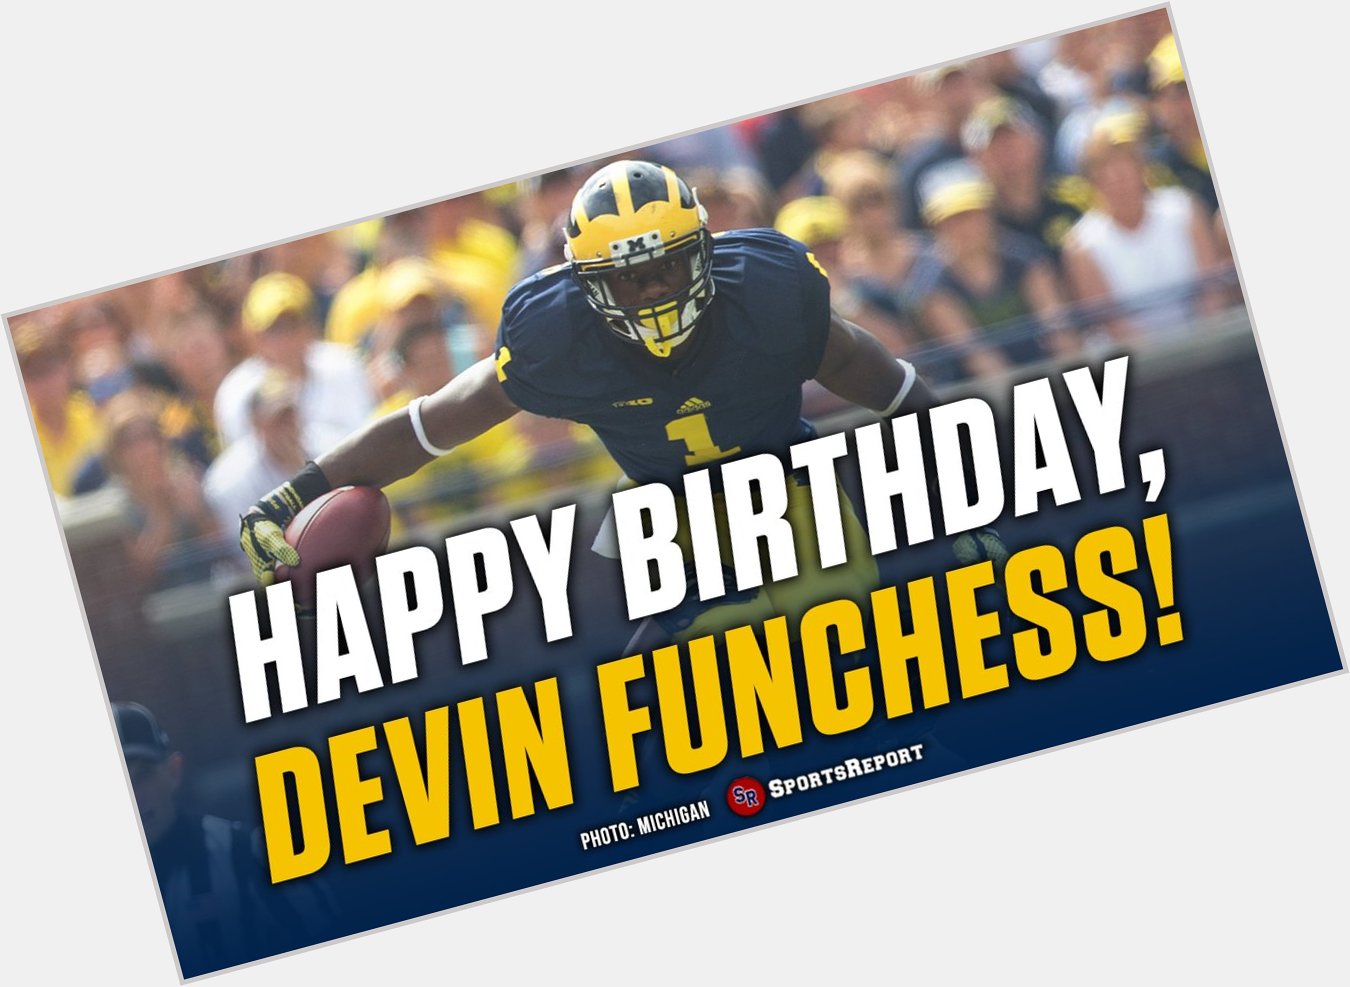  Fans, let\s wish Devin Funchess a Happy Birthday! GO BLUE!! 